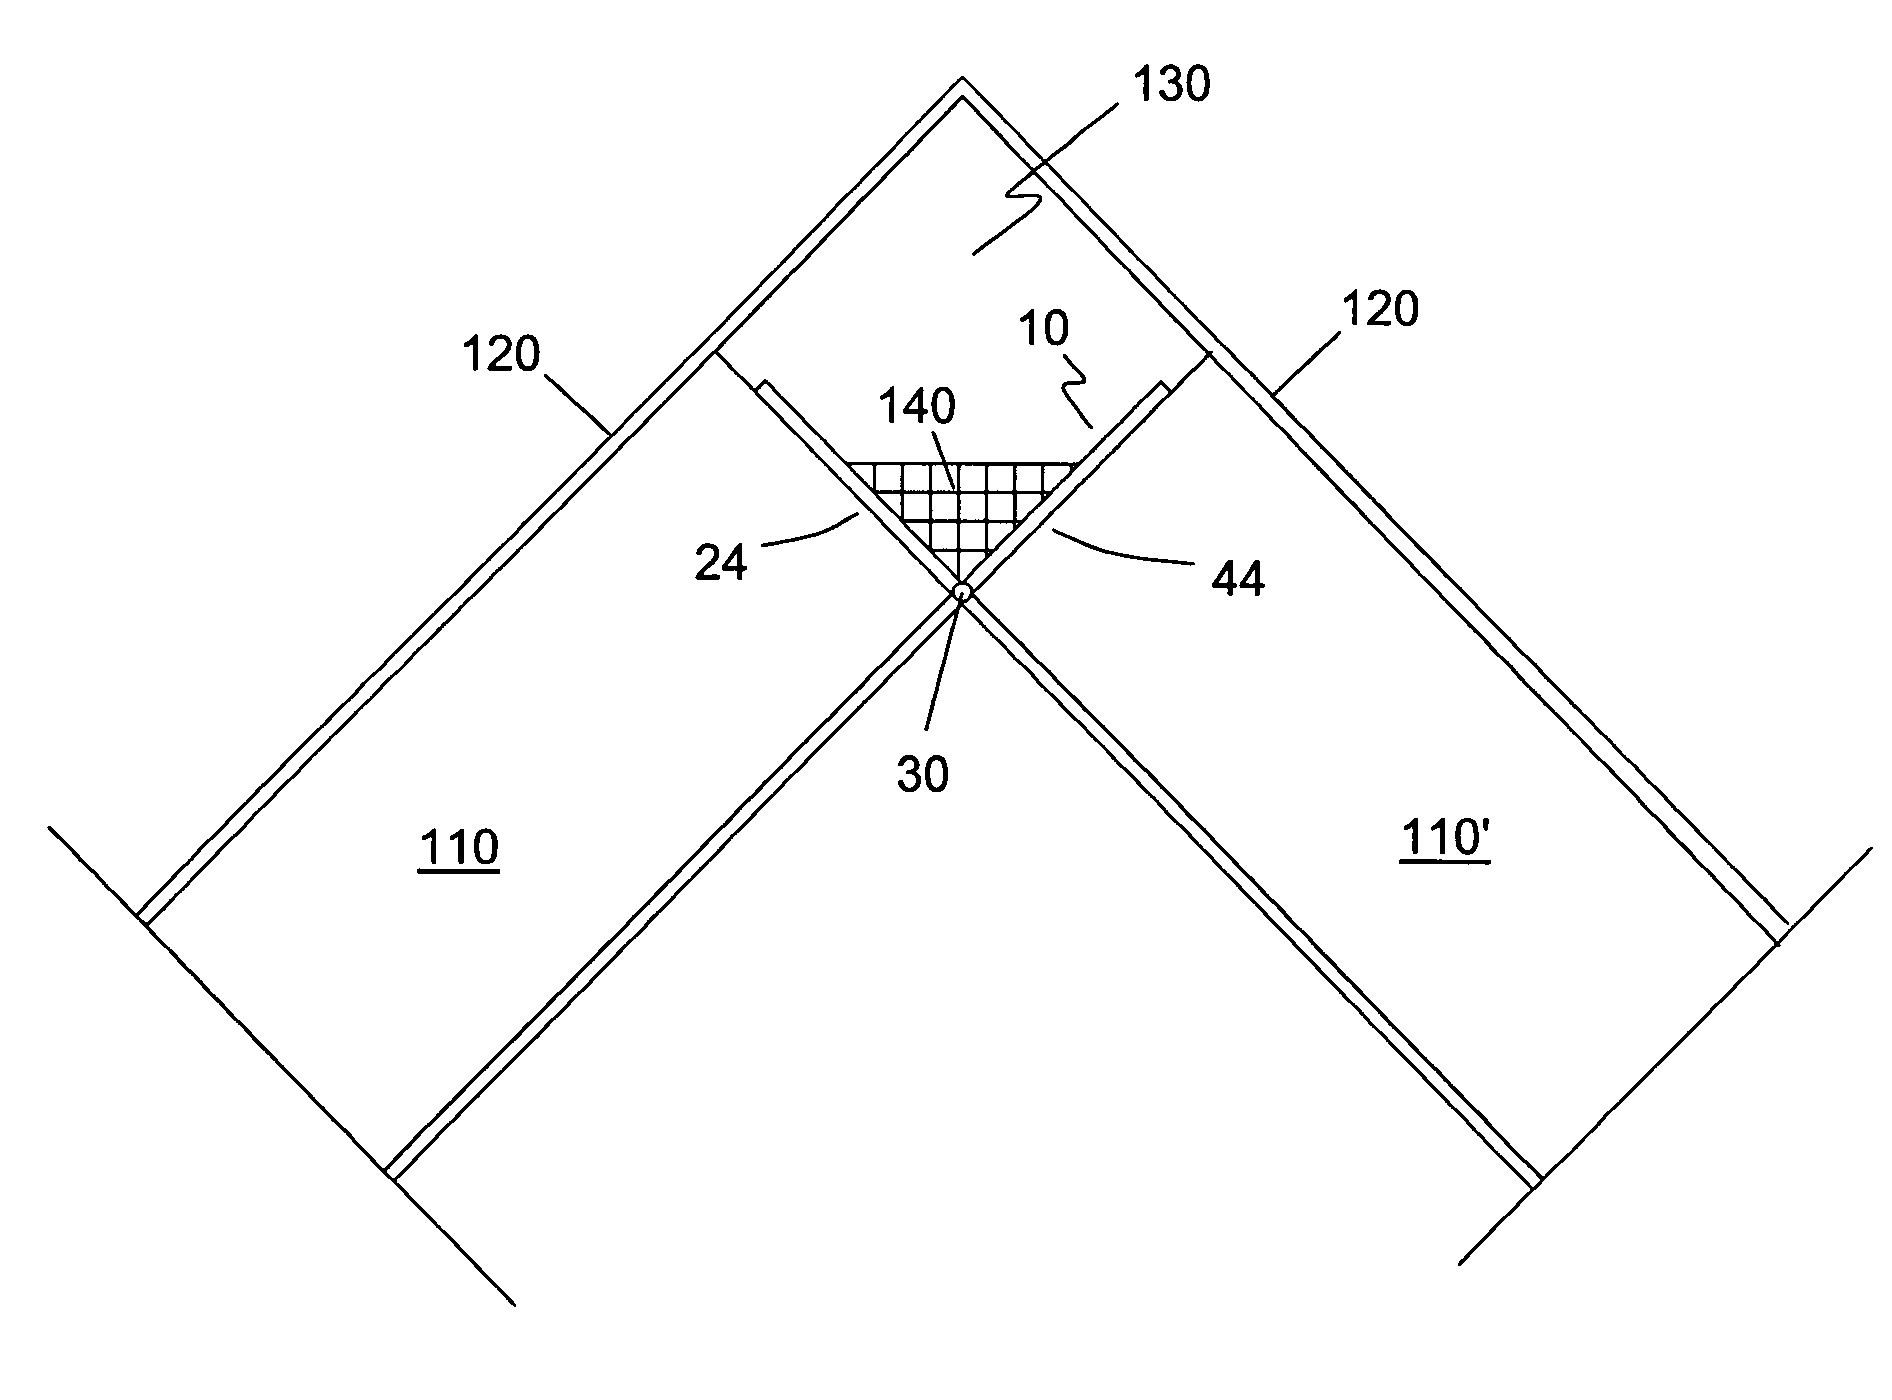 Construction bracket for creating a longitudinal roof venting space